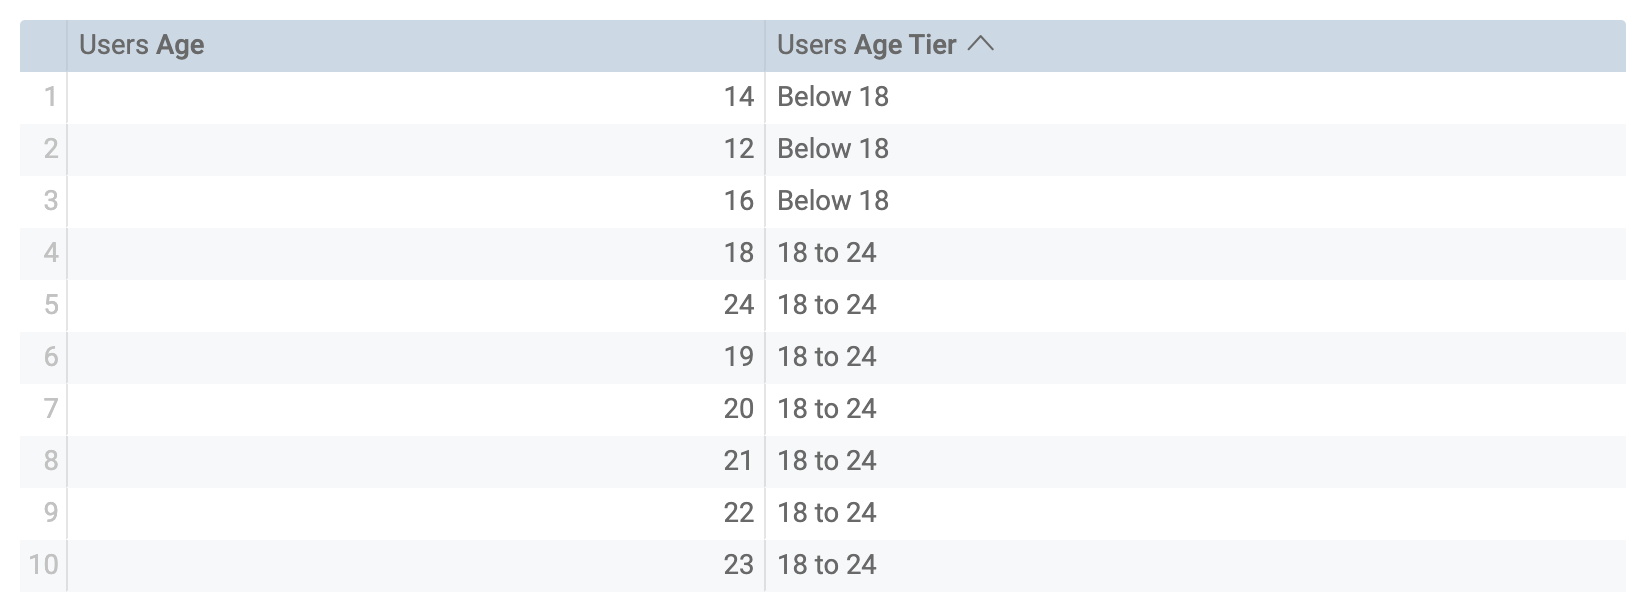 ages populated in the Users Age and Users Age Tier columns.